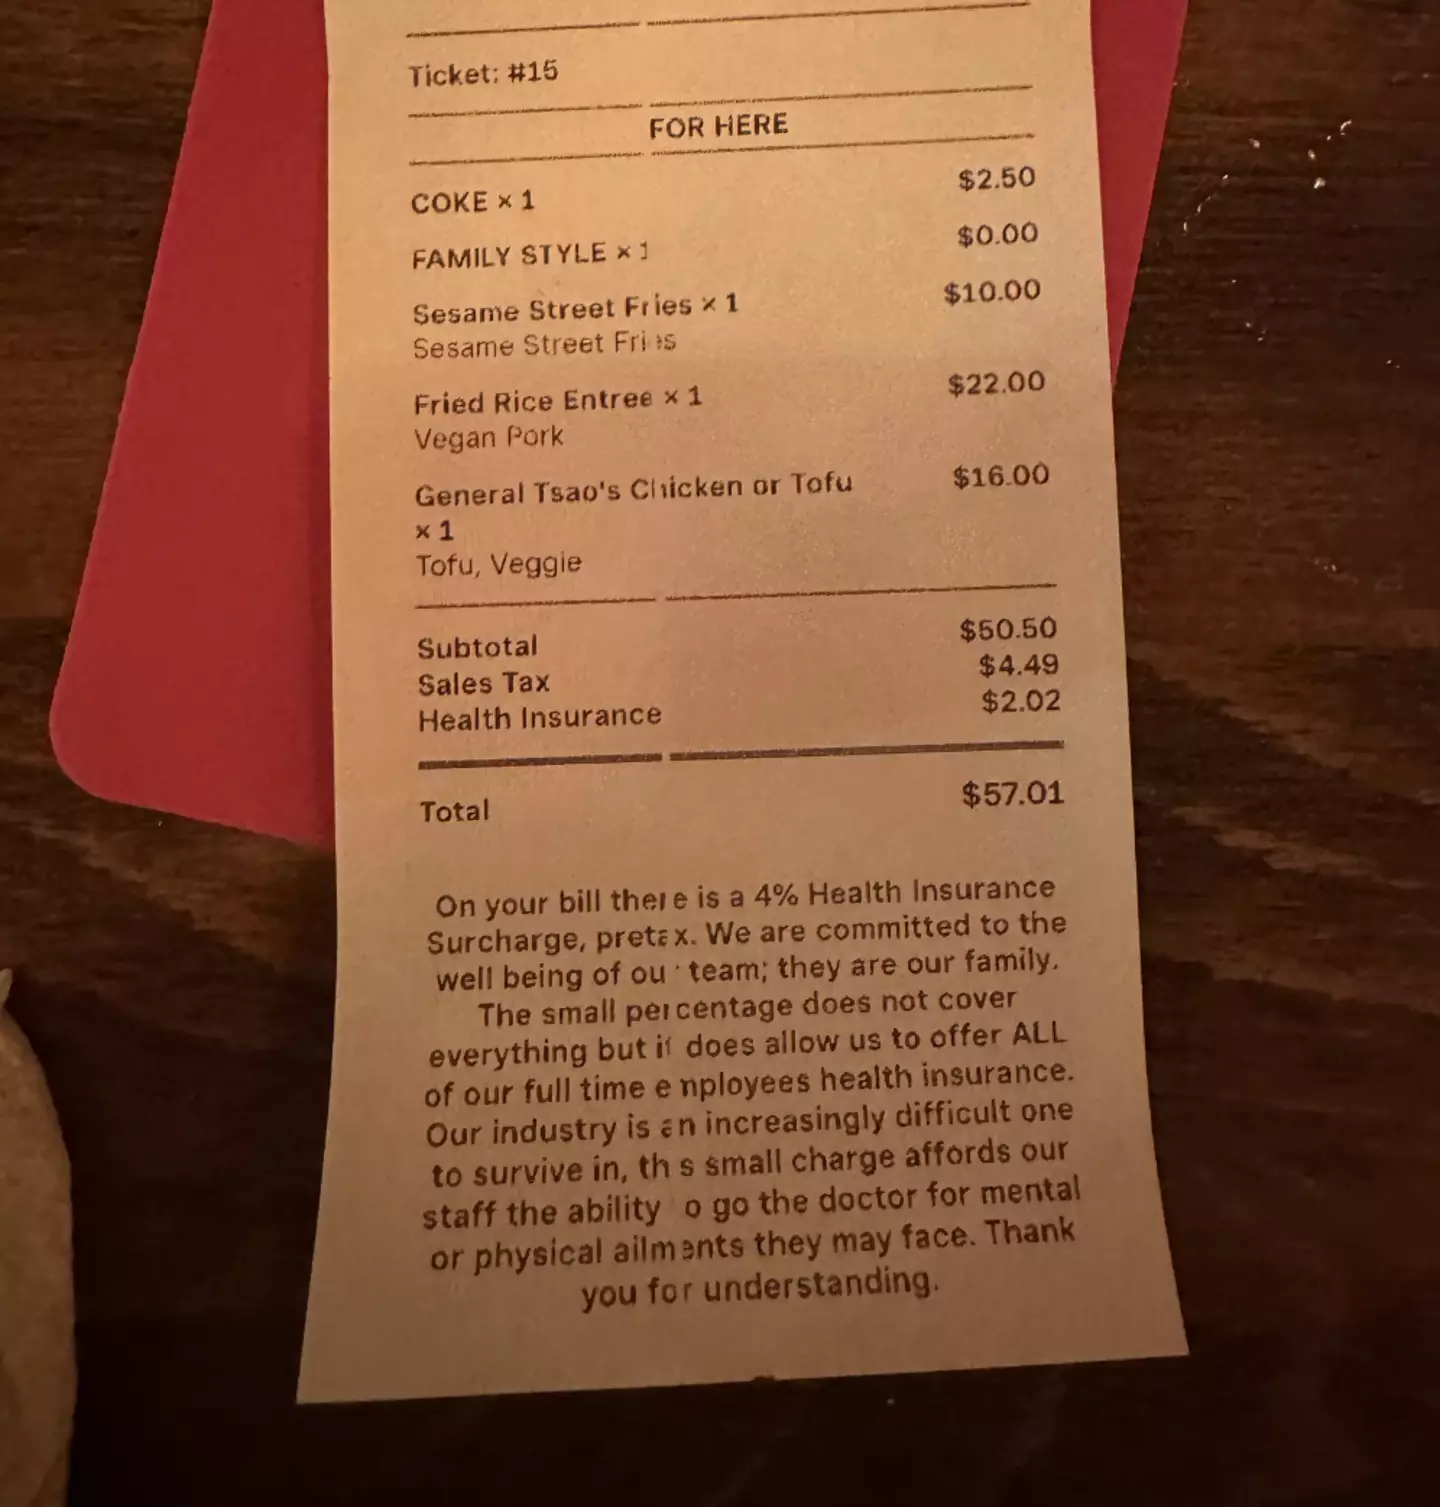 The bill came with a 'Health Insurance' fee added.